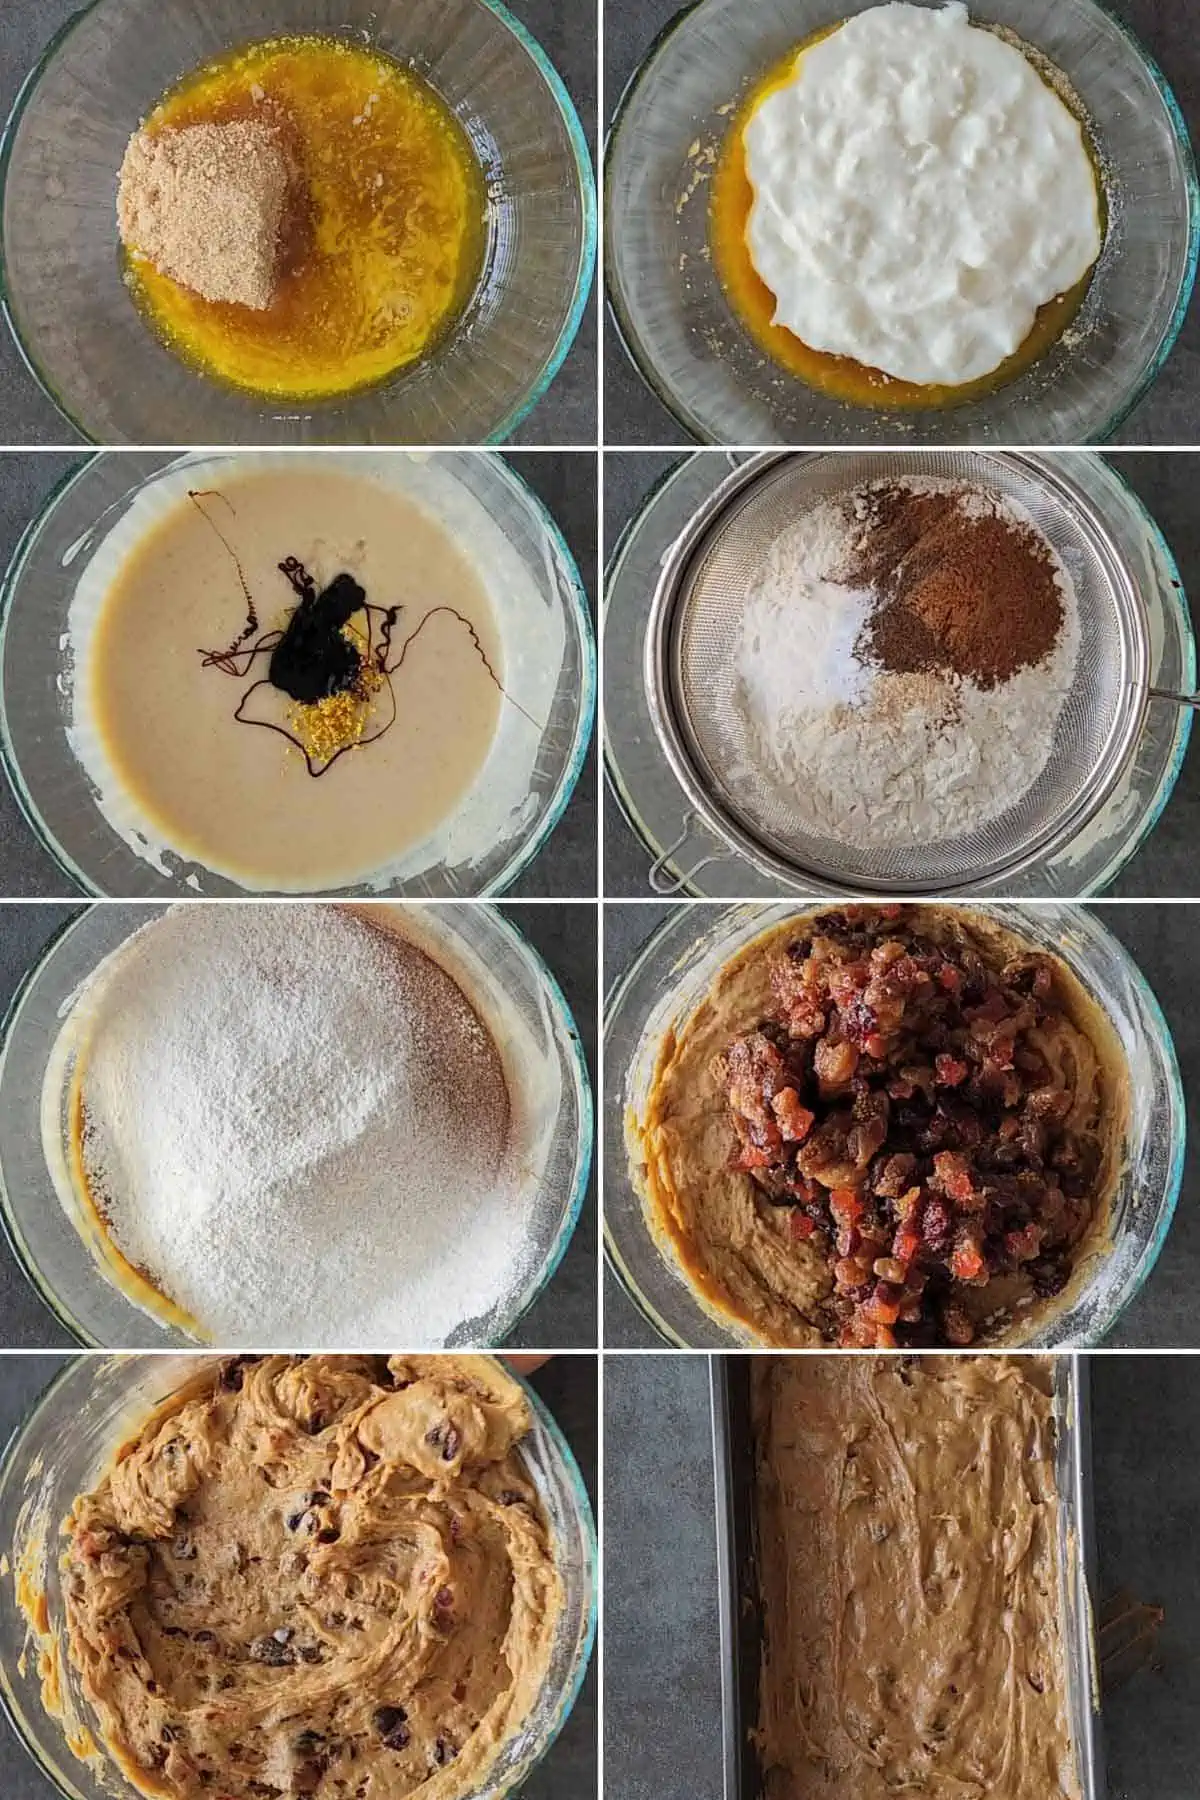 Step by step process of making fruit cake.